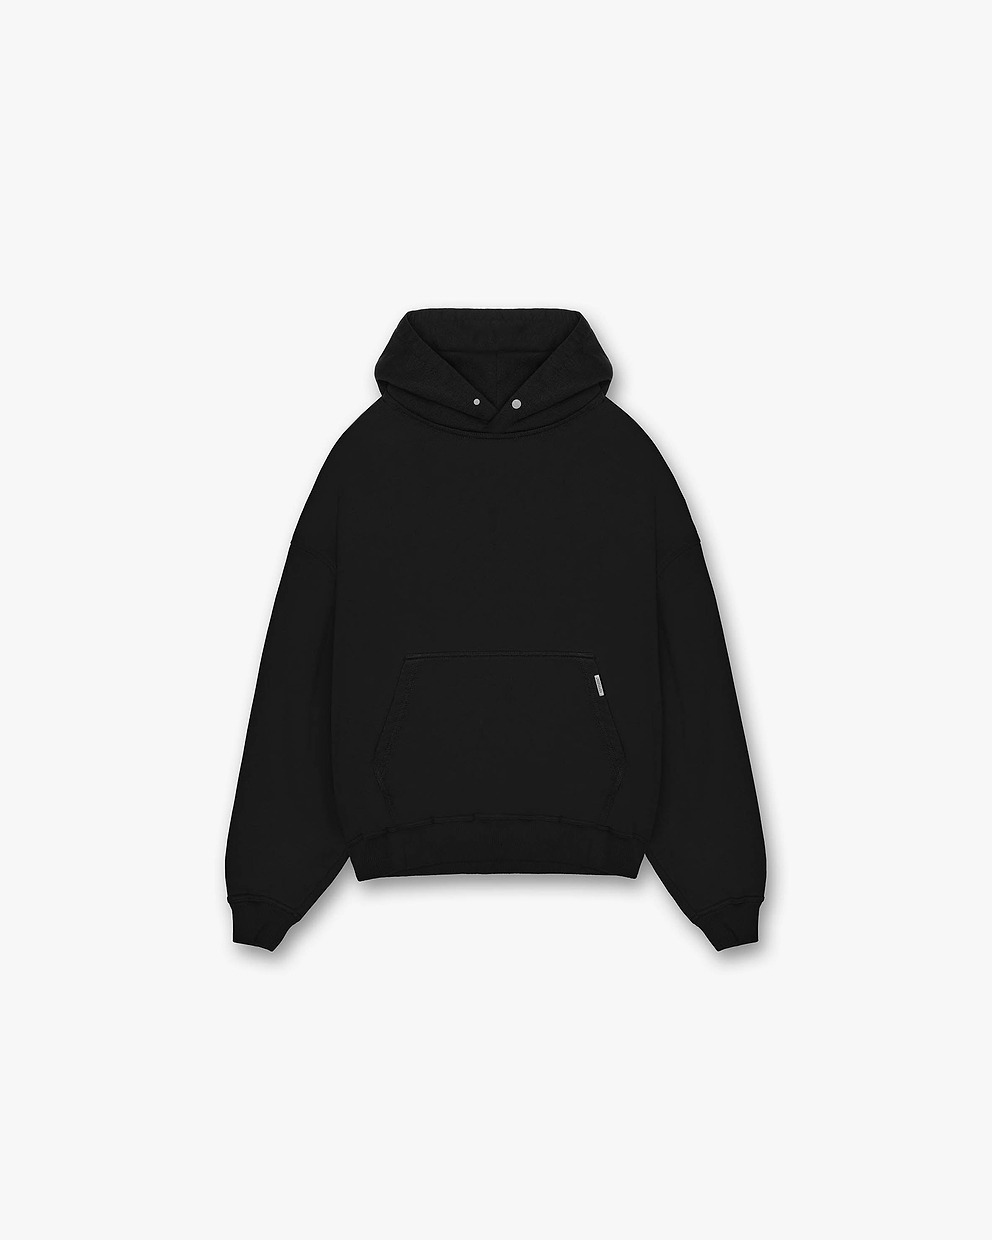 Branded, Stylish and Premium Quality oversized blank hoodie 